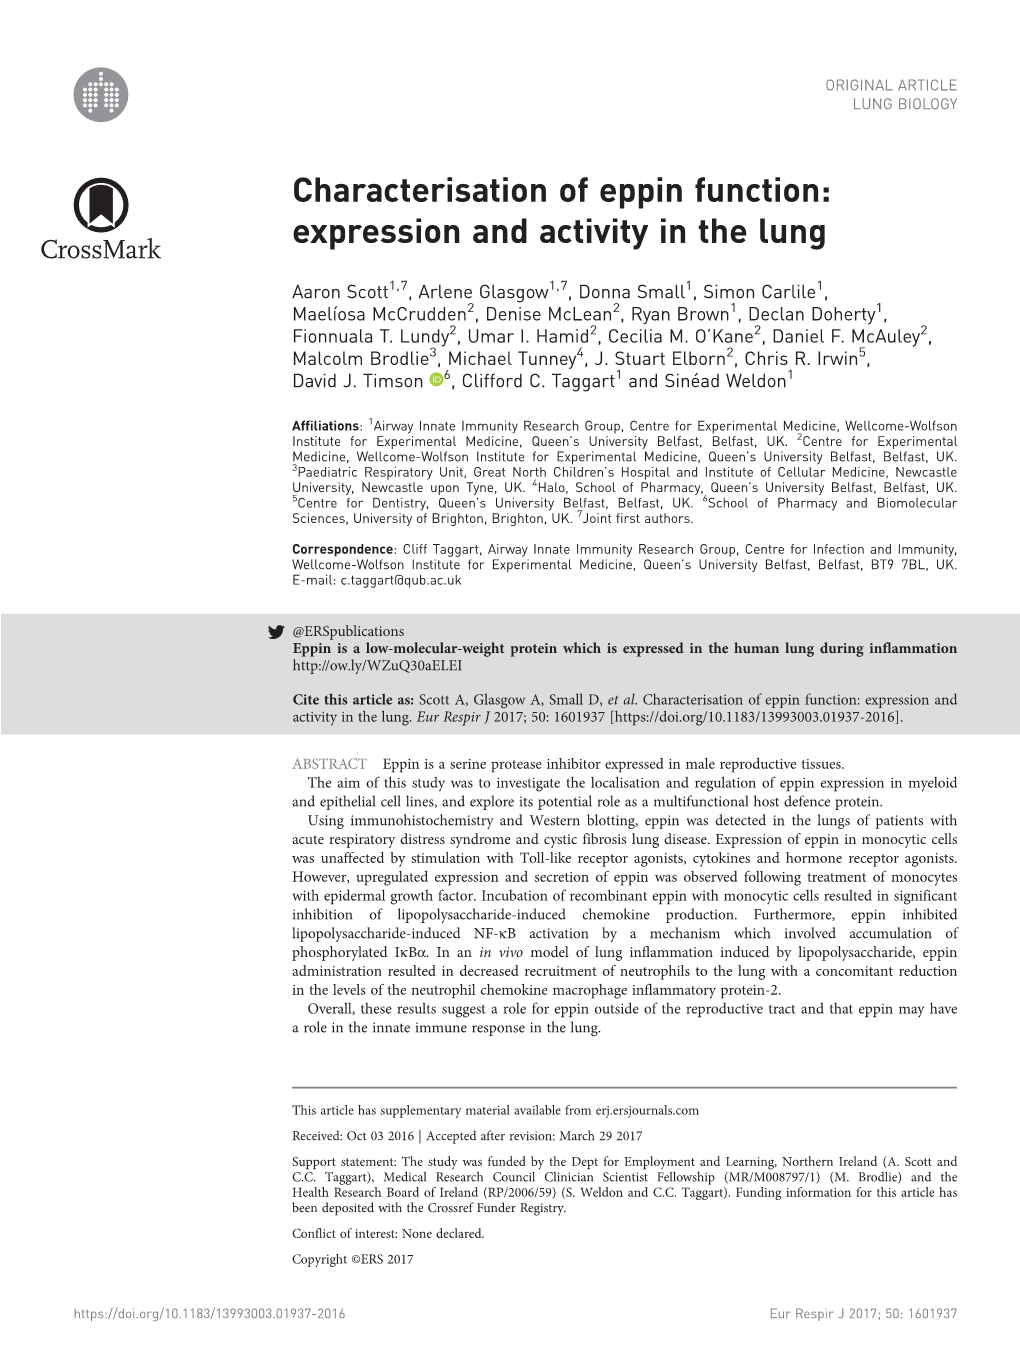 Characterisation of Eppin Function: Expression and Activity in the Lung